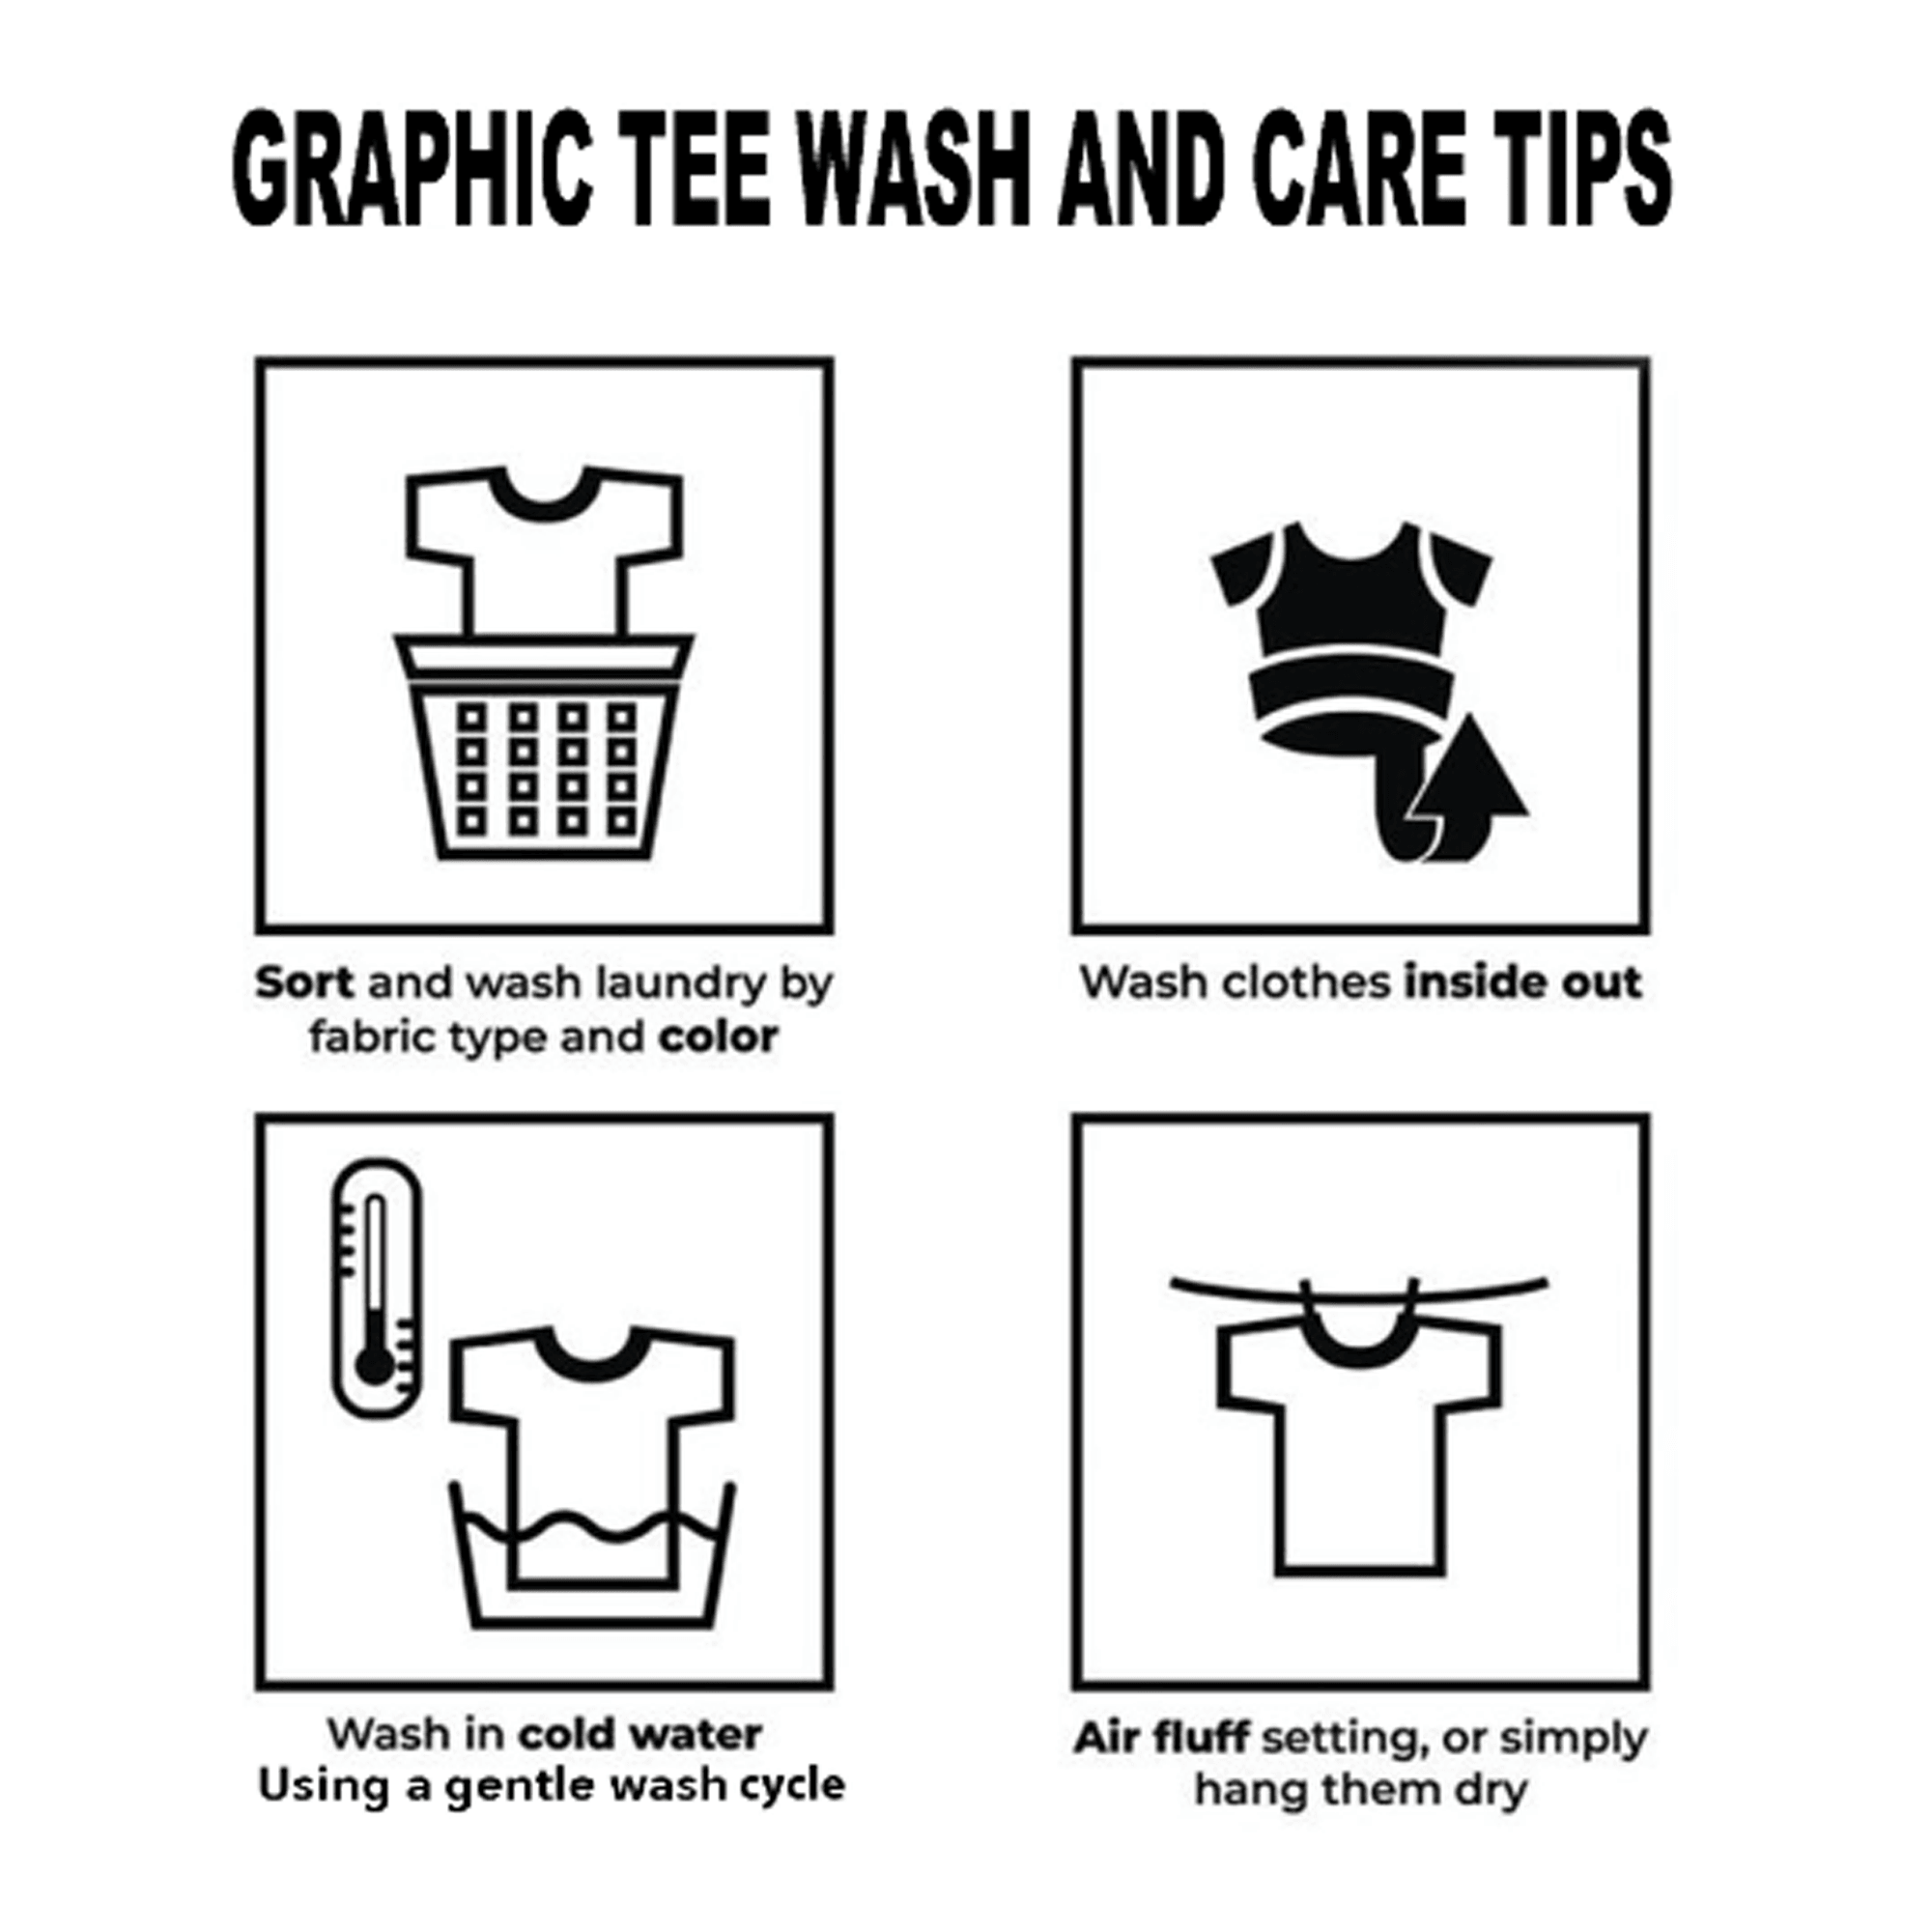 Trust No One Sneaker Shirt care tips photo